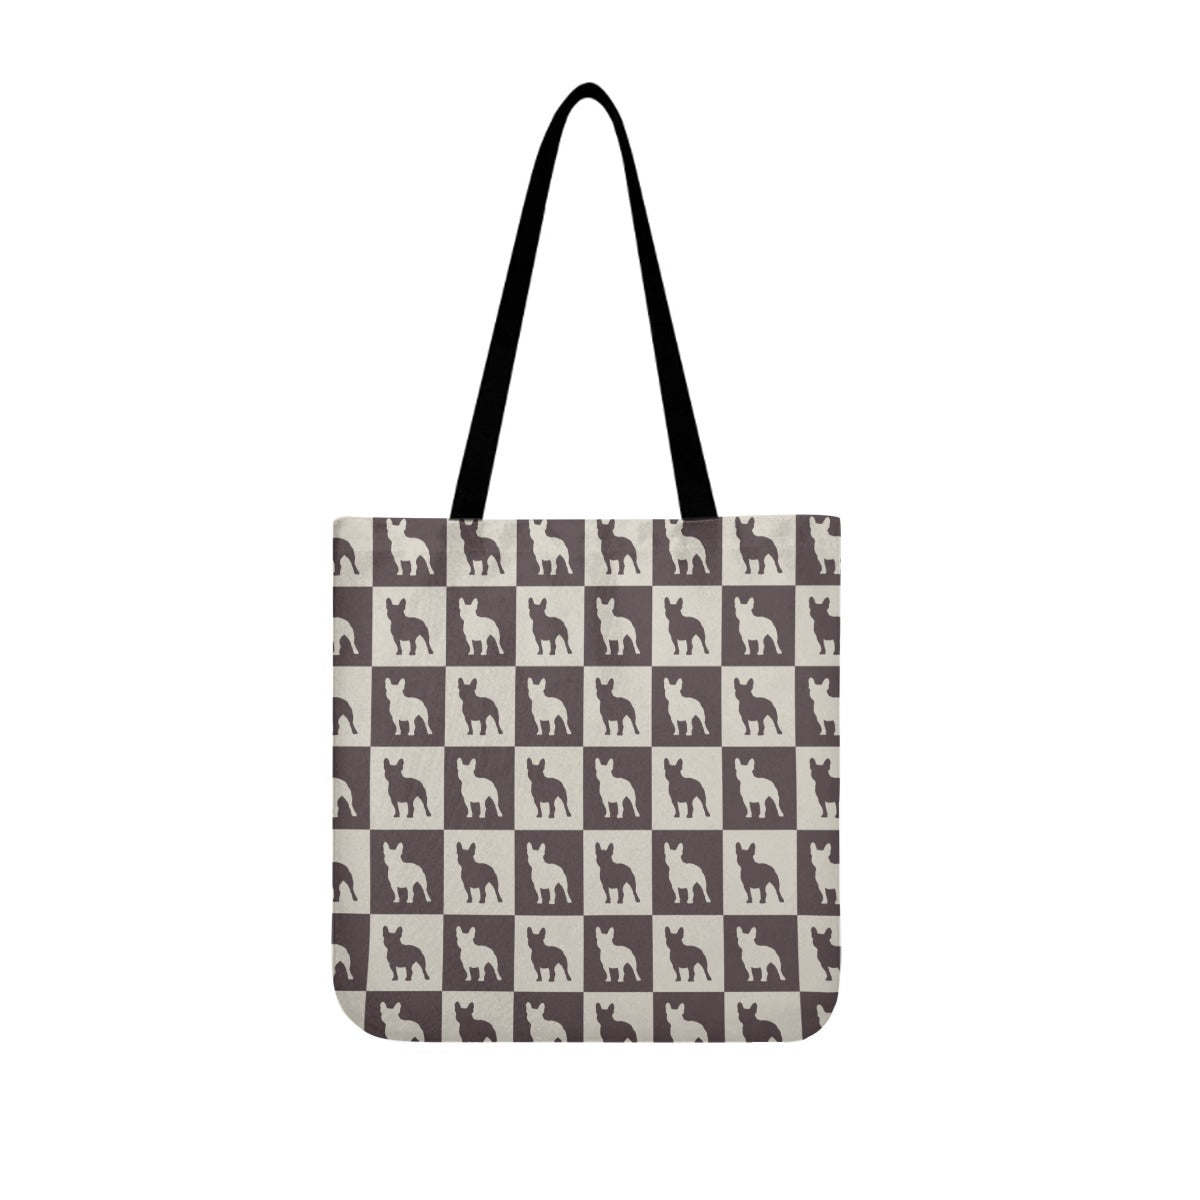 Mickie - Cloth Tote Bags for Boston Terrier lovers